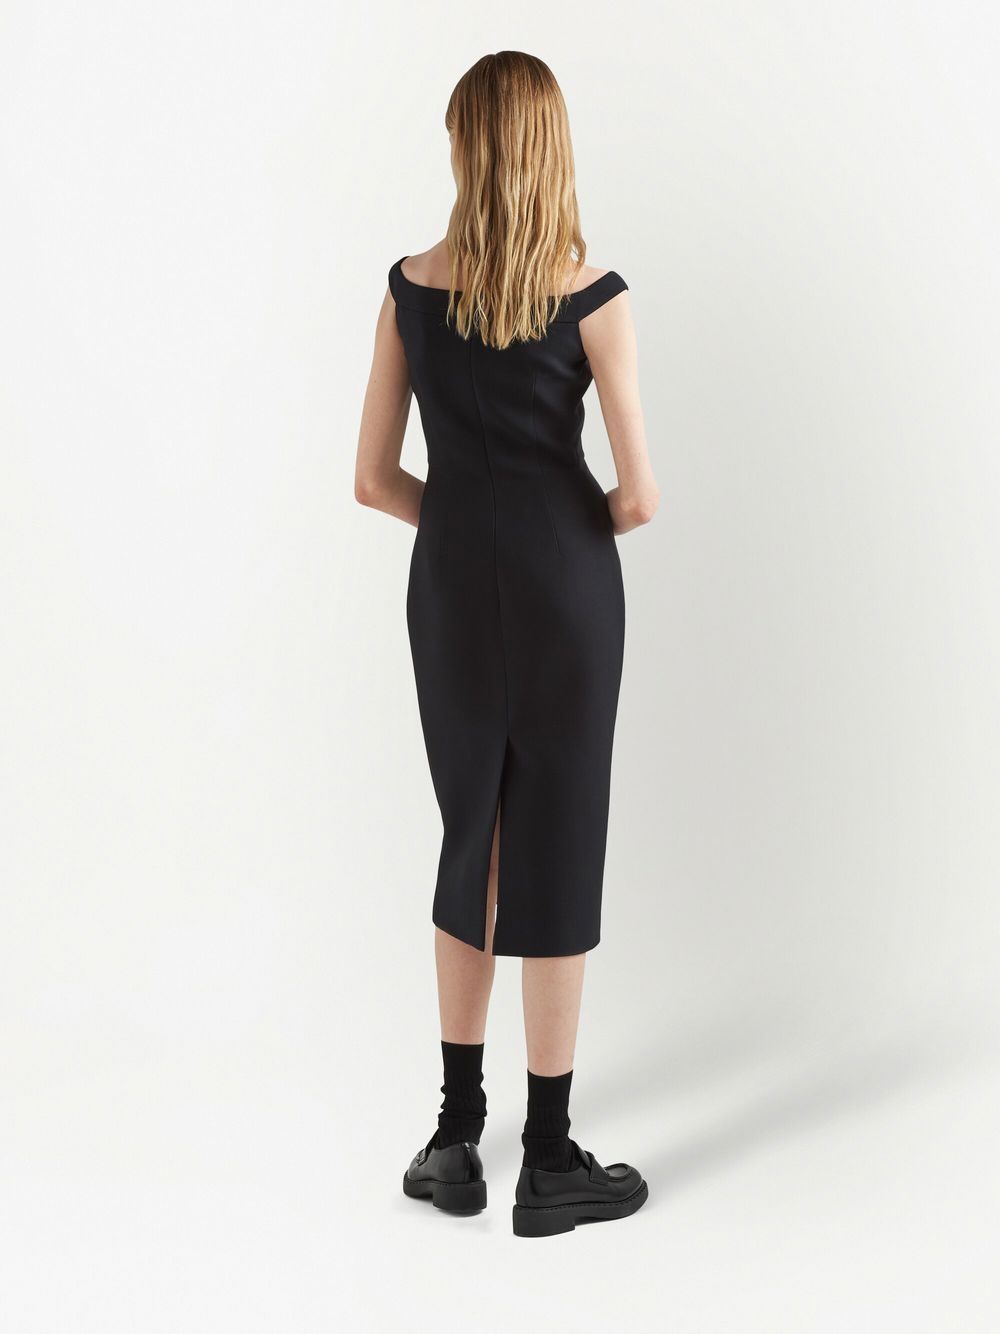 fitted mid-length dress